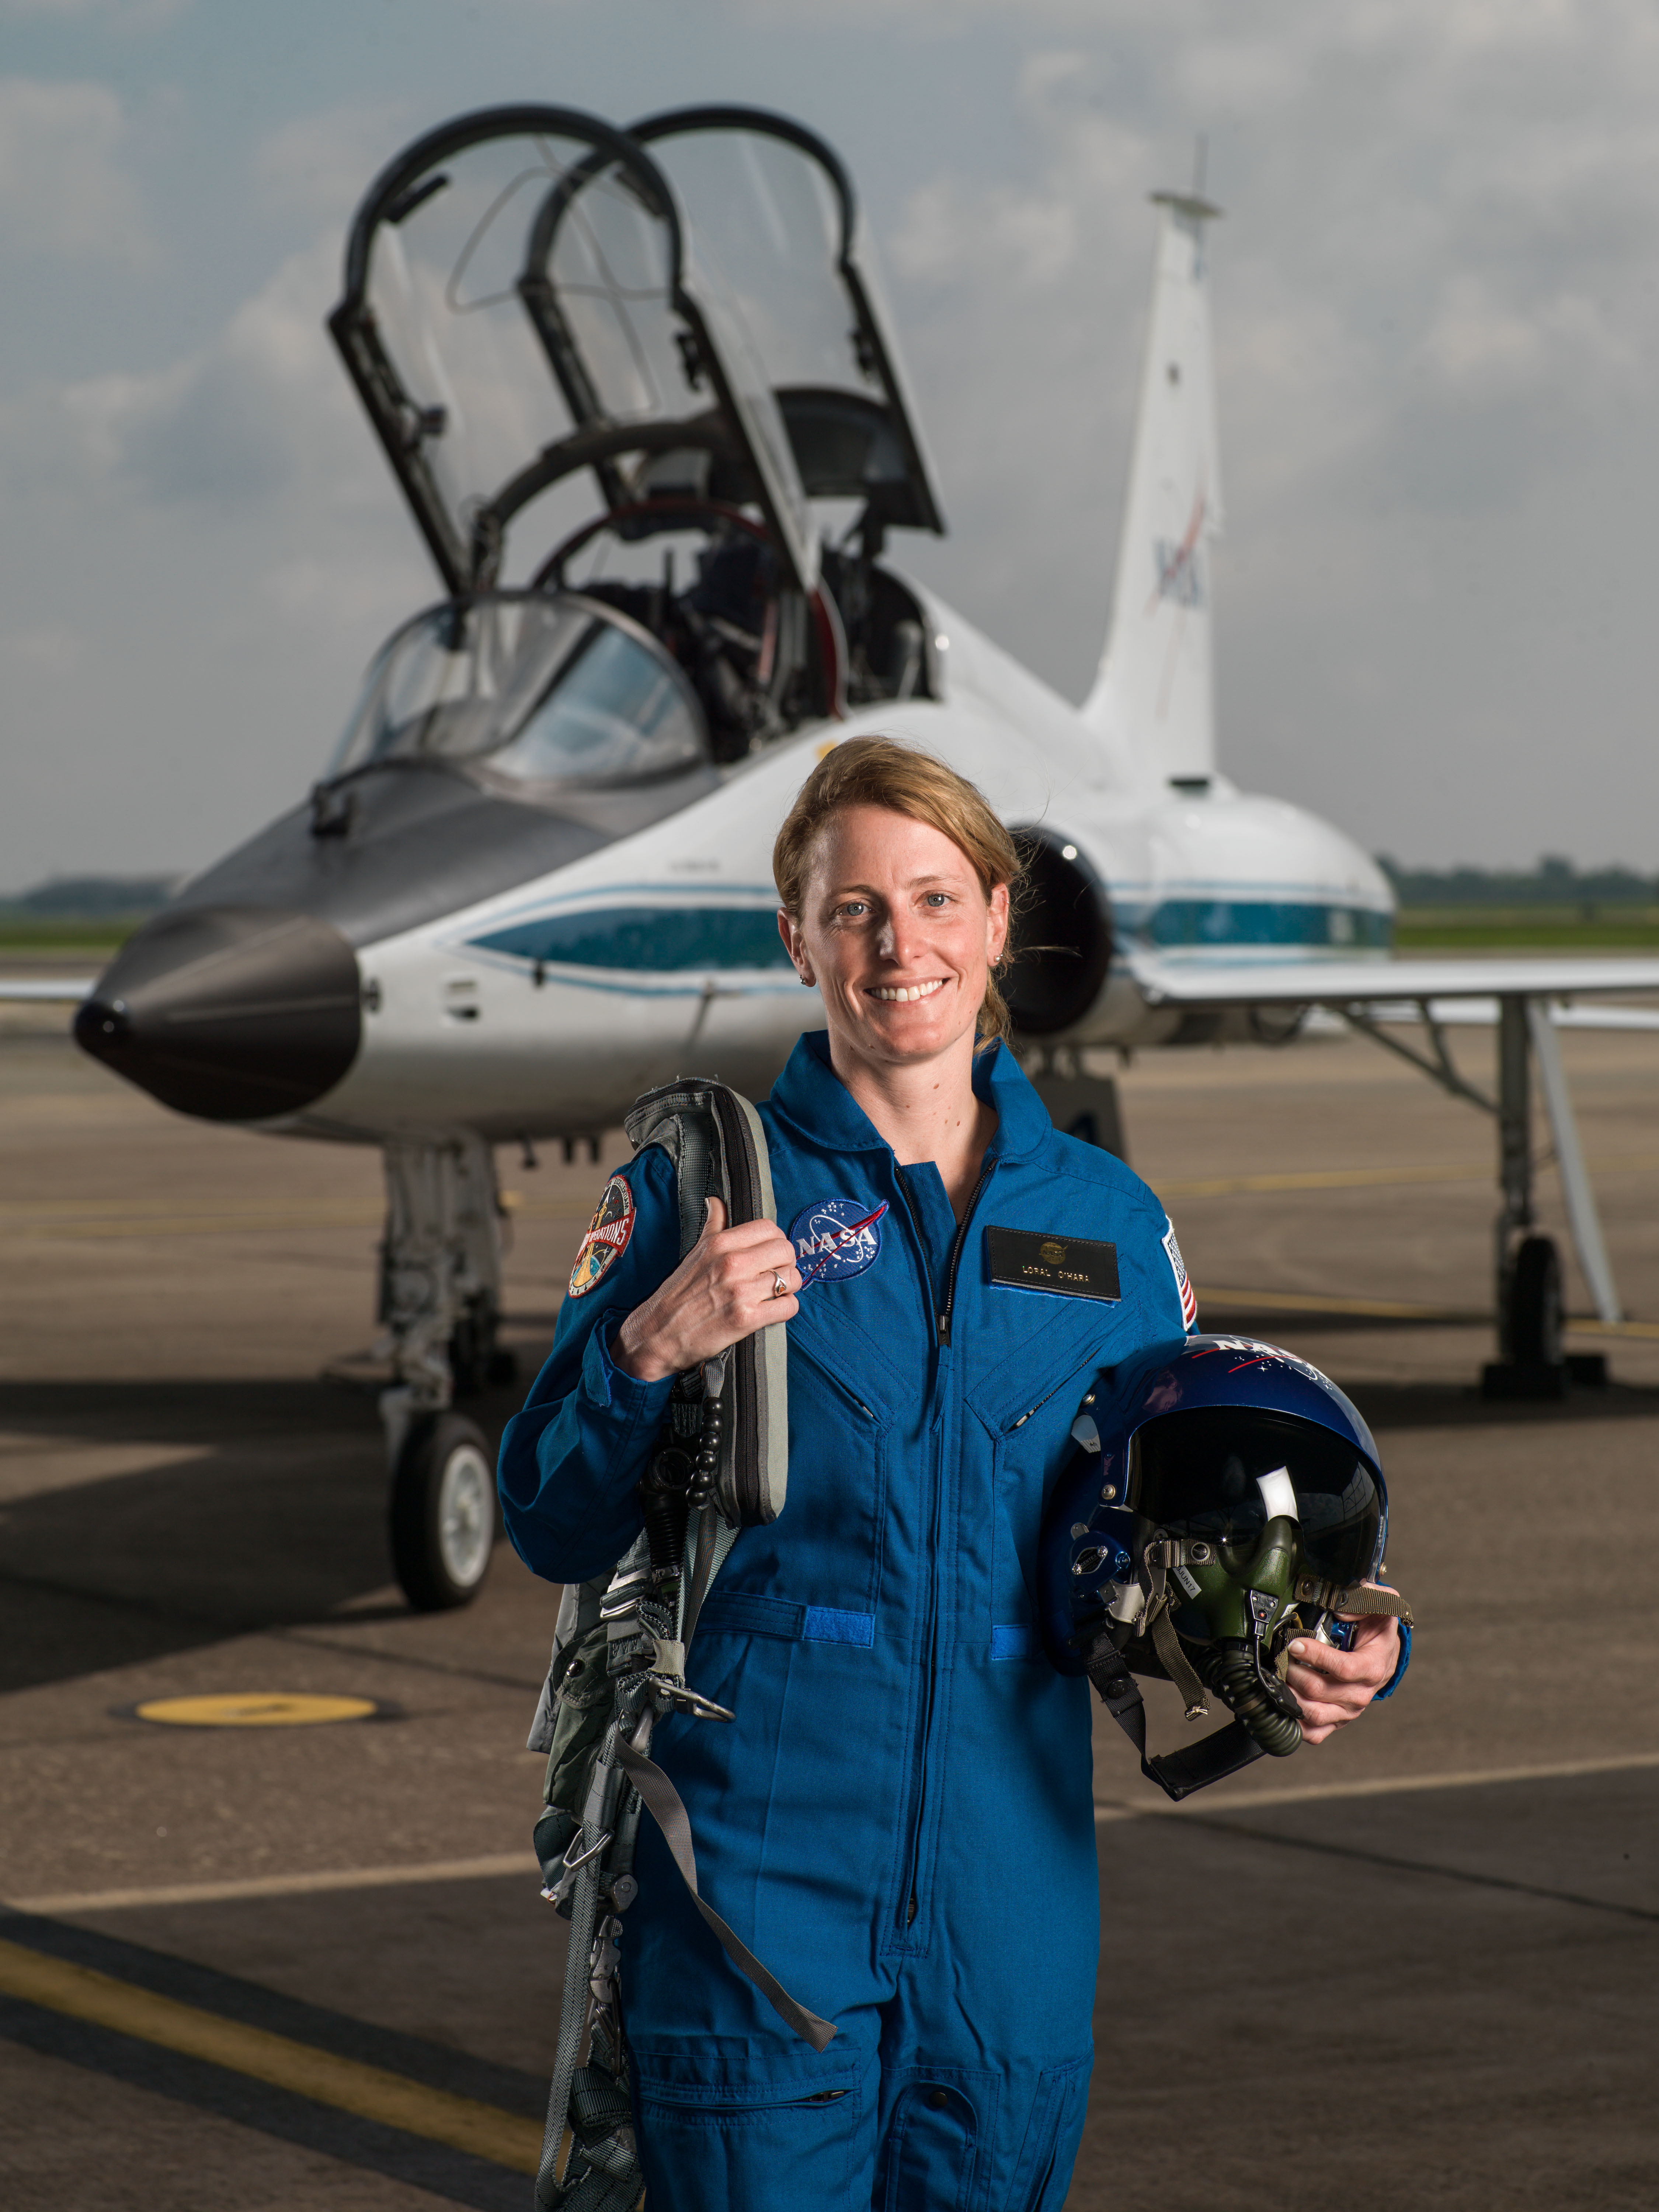 NASA portrait of 2017 Astronaut Candidate Loral O'Hara in front of a T-38 trainer aircraft at Ellington Field near NASA’s Johnson Space Center in Houston, Texas.